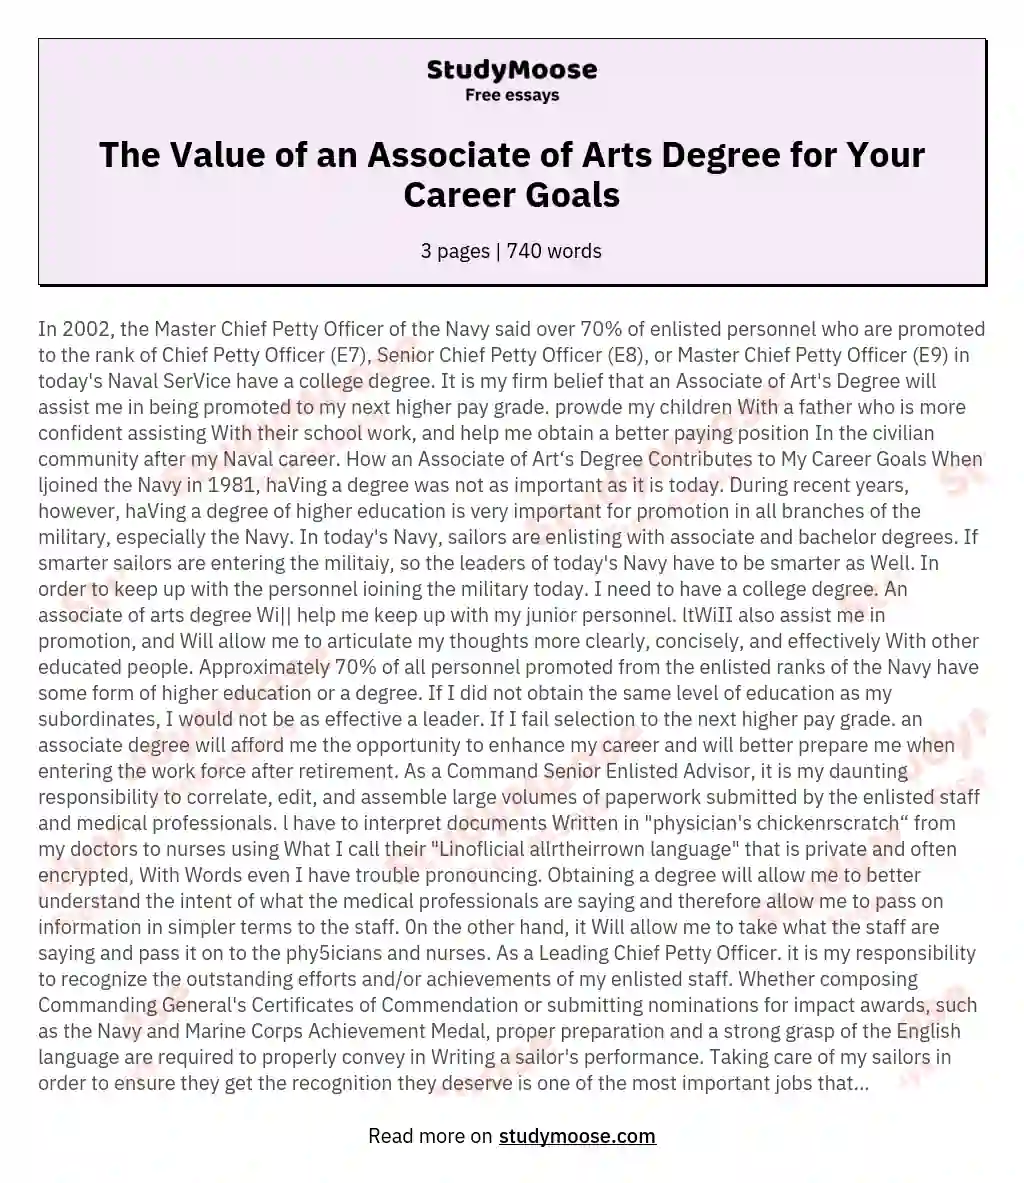 The Value of an Associate of Arts Degree for Your Career Goals essay